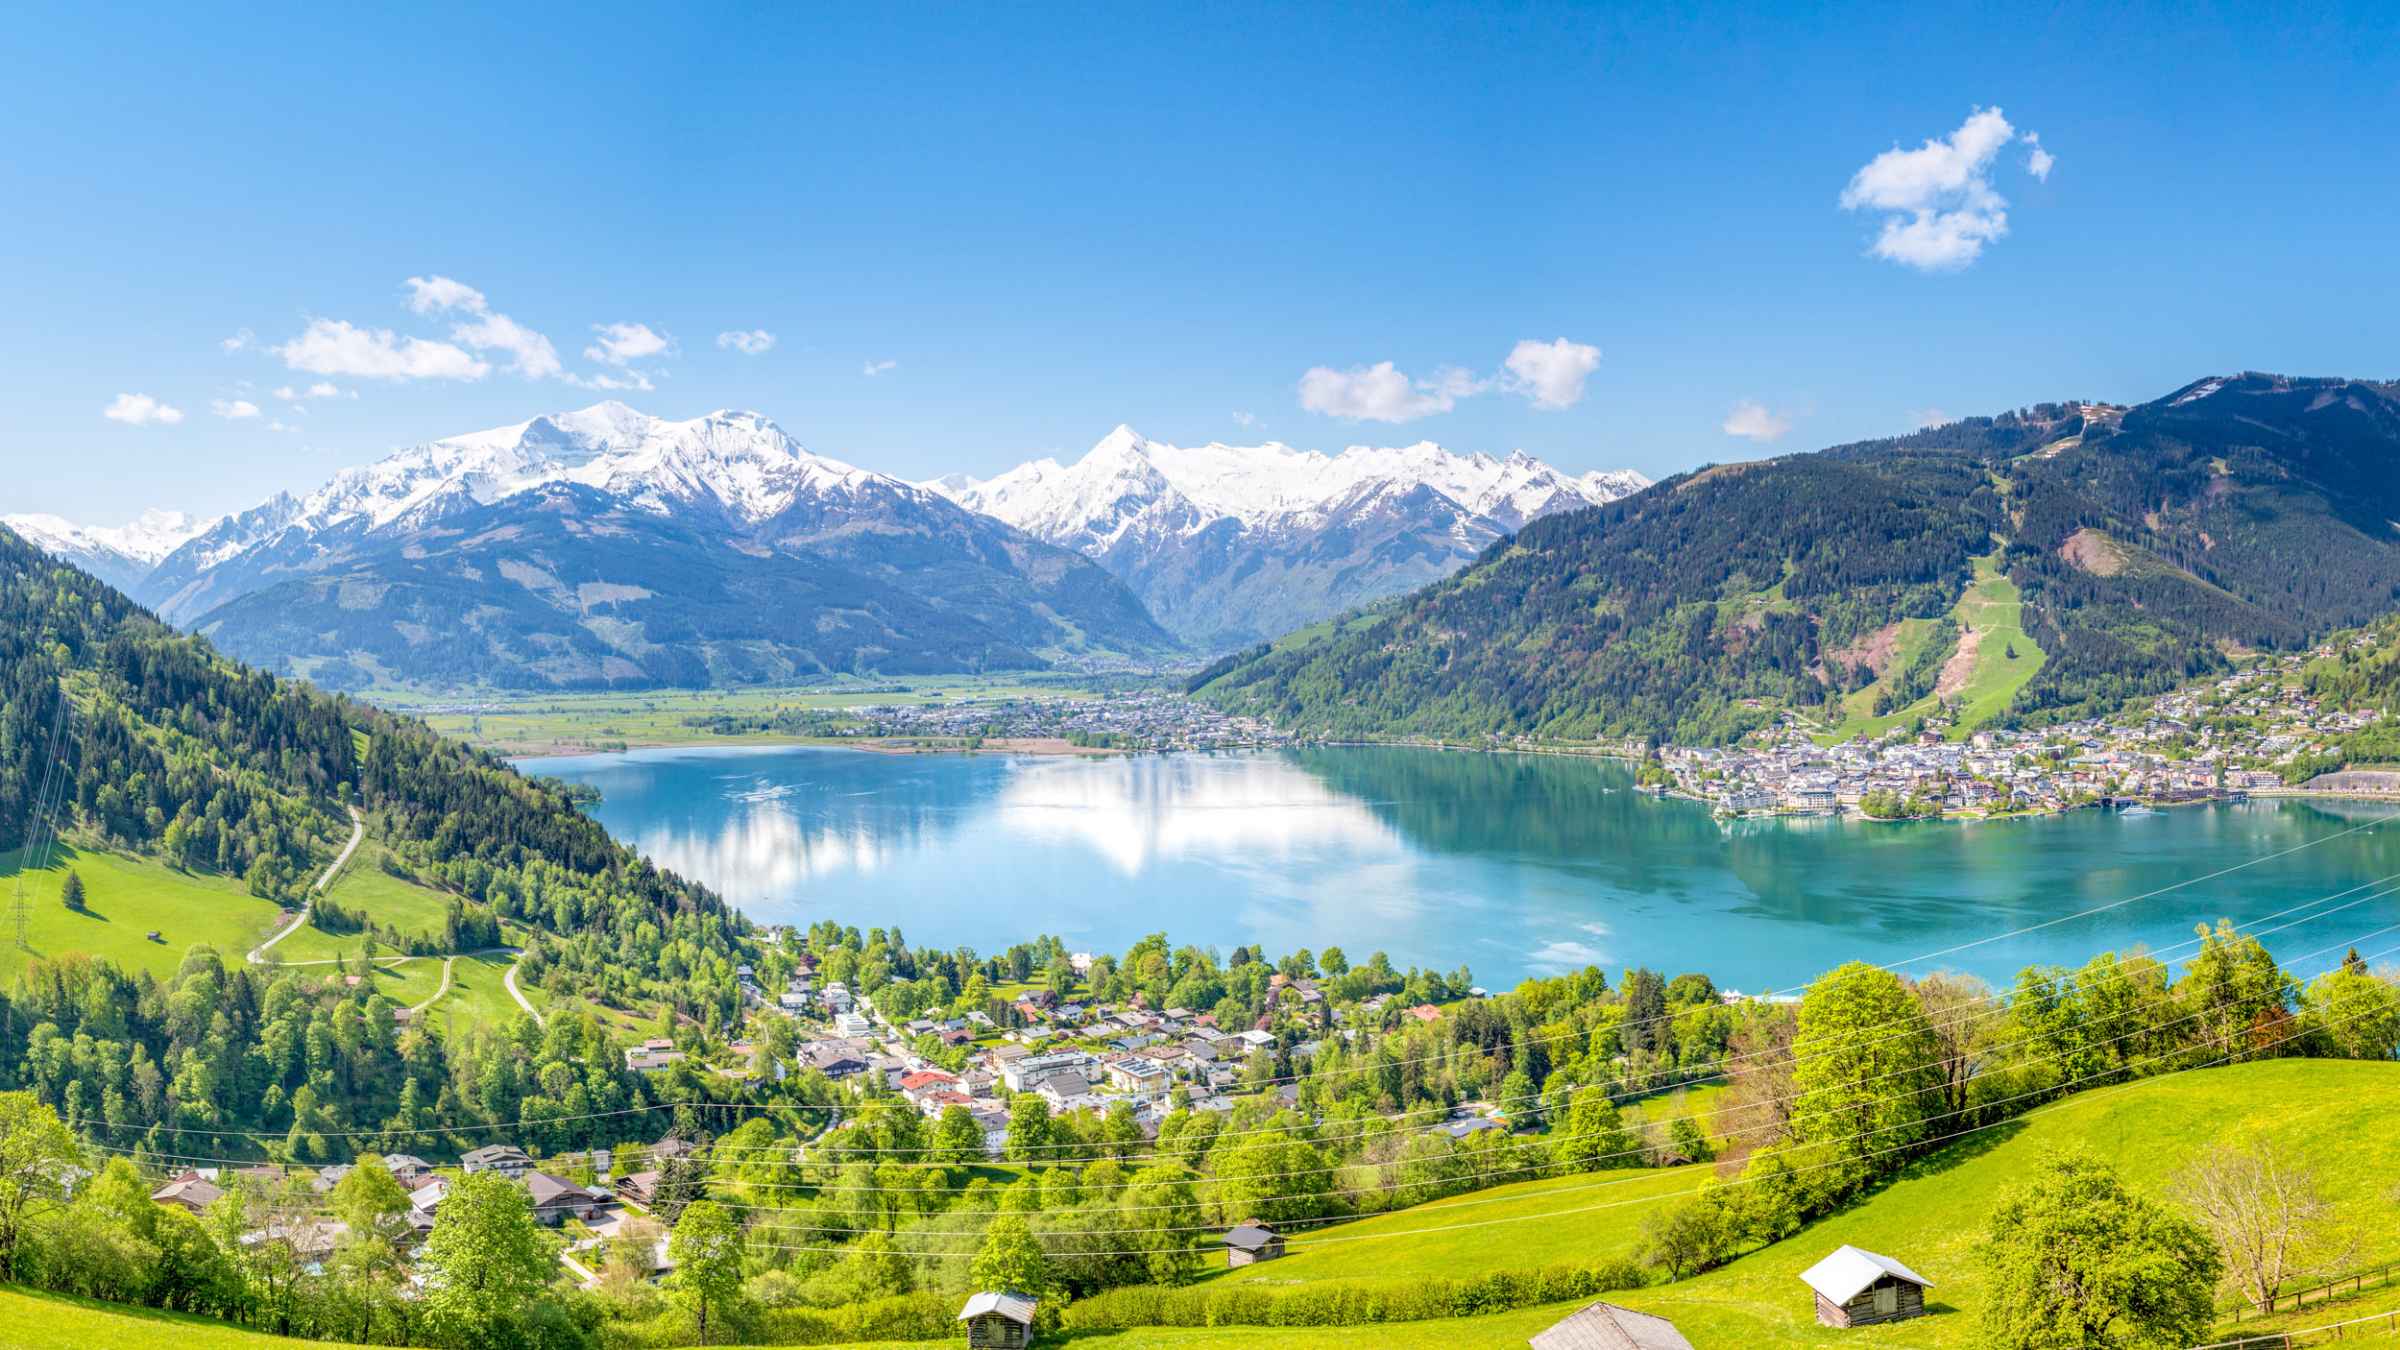 The BEST Zell am See Water Sports 2022 - FREE Cancellation | GetYourGuide